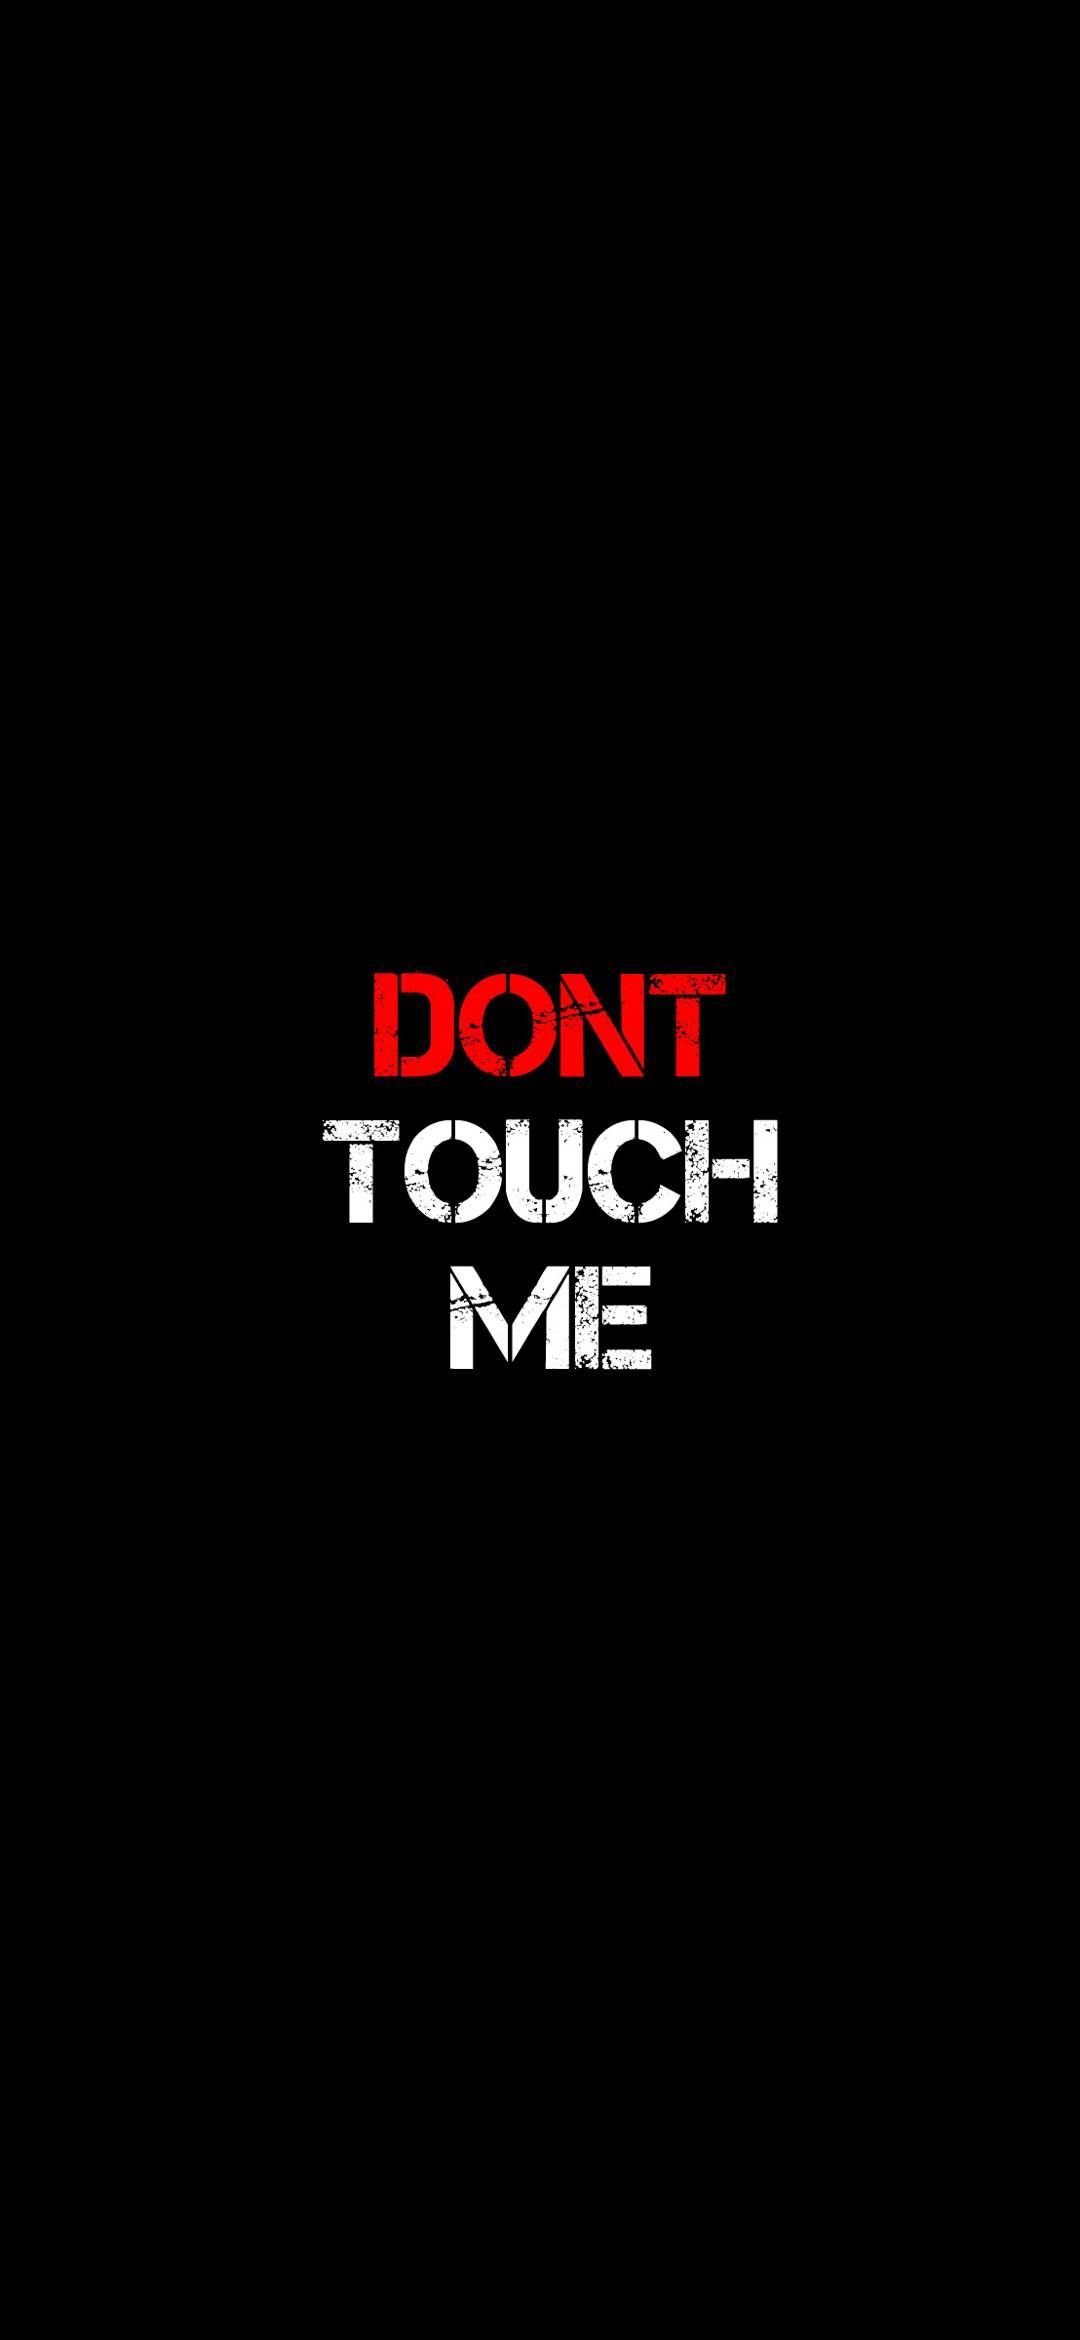 DONT TOUCH MY PHONE WALLPAPER 2(made by mee) | Dont touch my phone wallpaper,  Dont touch me, Touch me